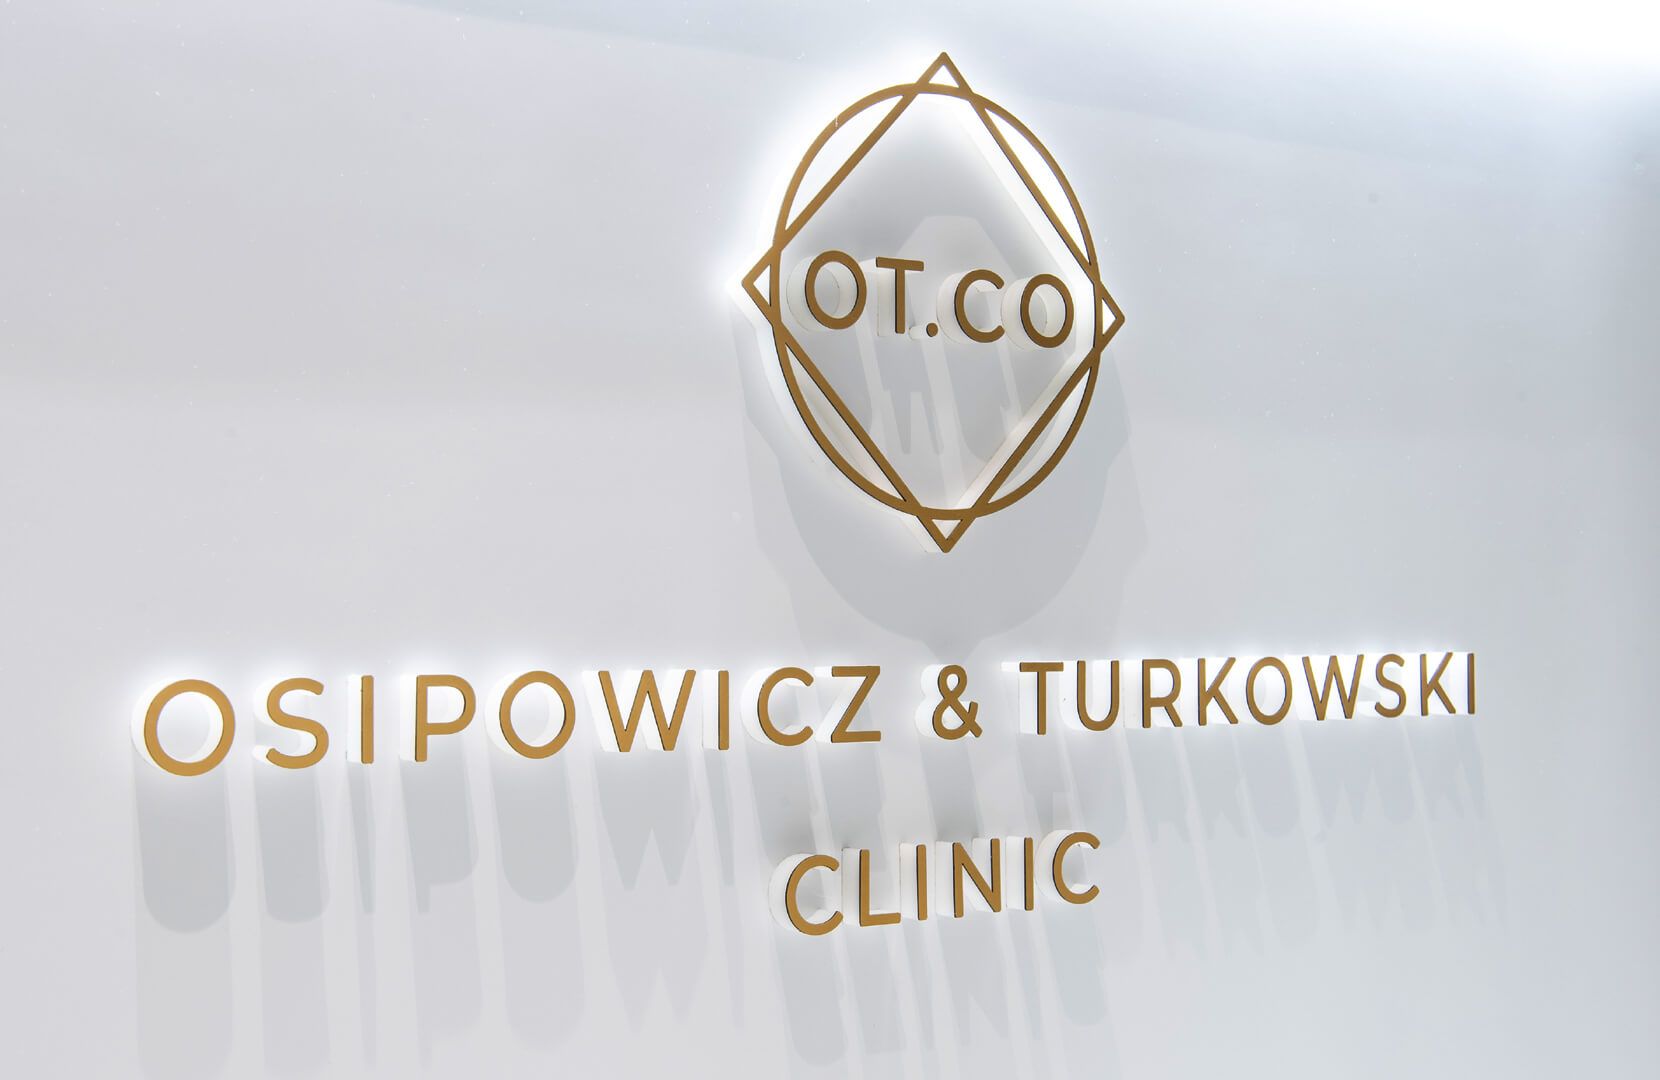 3D letters at the reception of OT.CO Clinic - Three-dimensional gold letters with logo at the reception desk at OT.CO Clinic